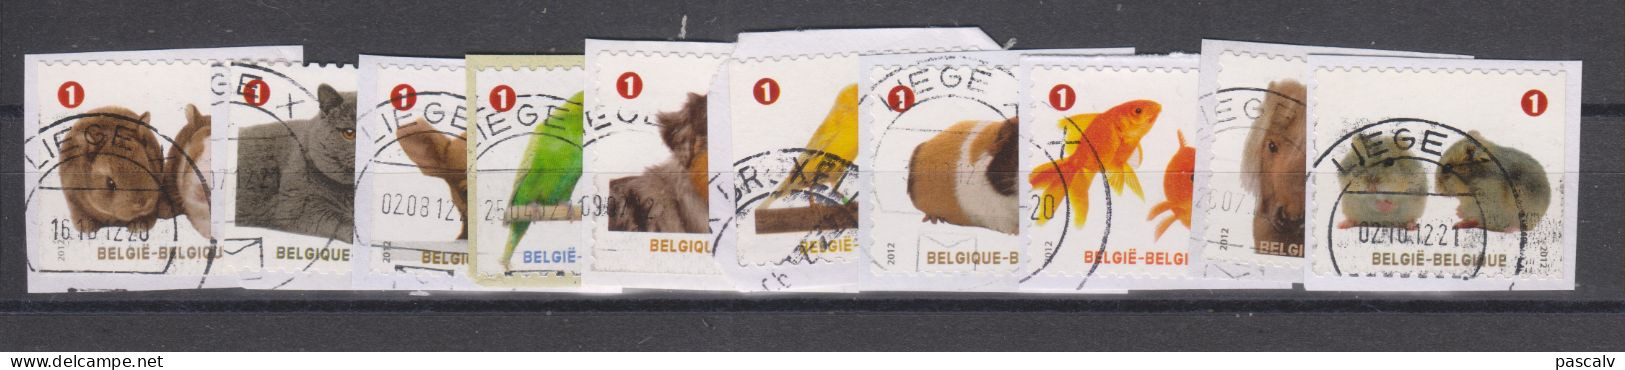 COB 4230 / 4239 Série Complète Animaux Canard Chien Chat Poney Lapin Hamster Cobaye - Used Stamps